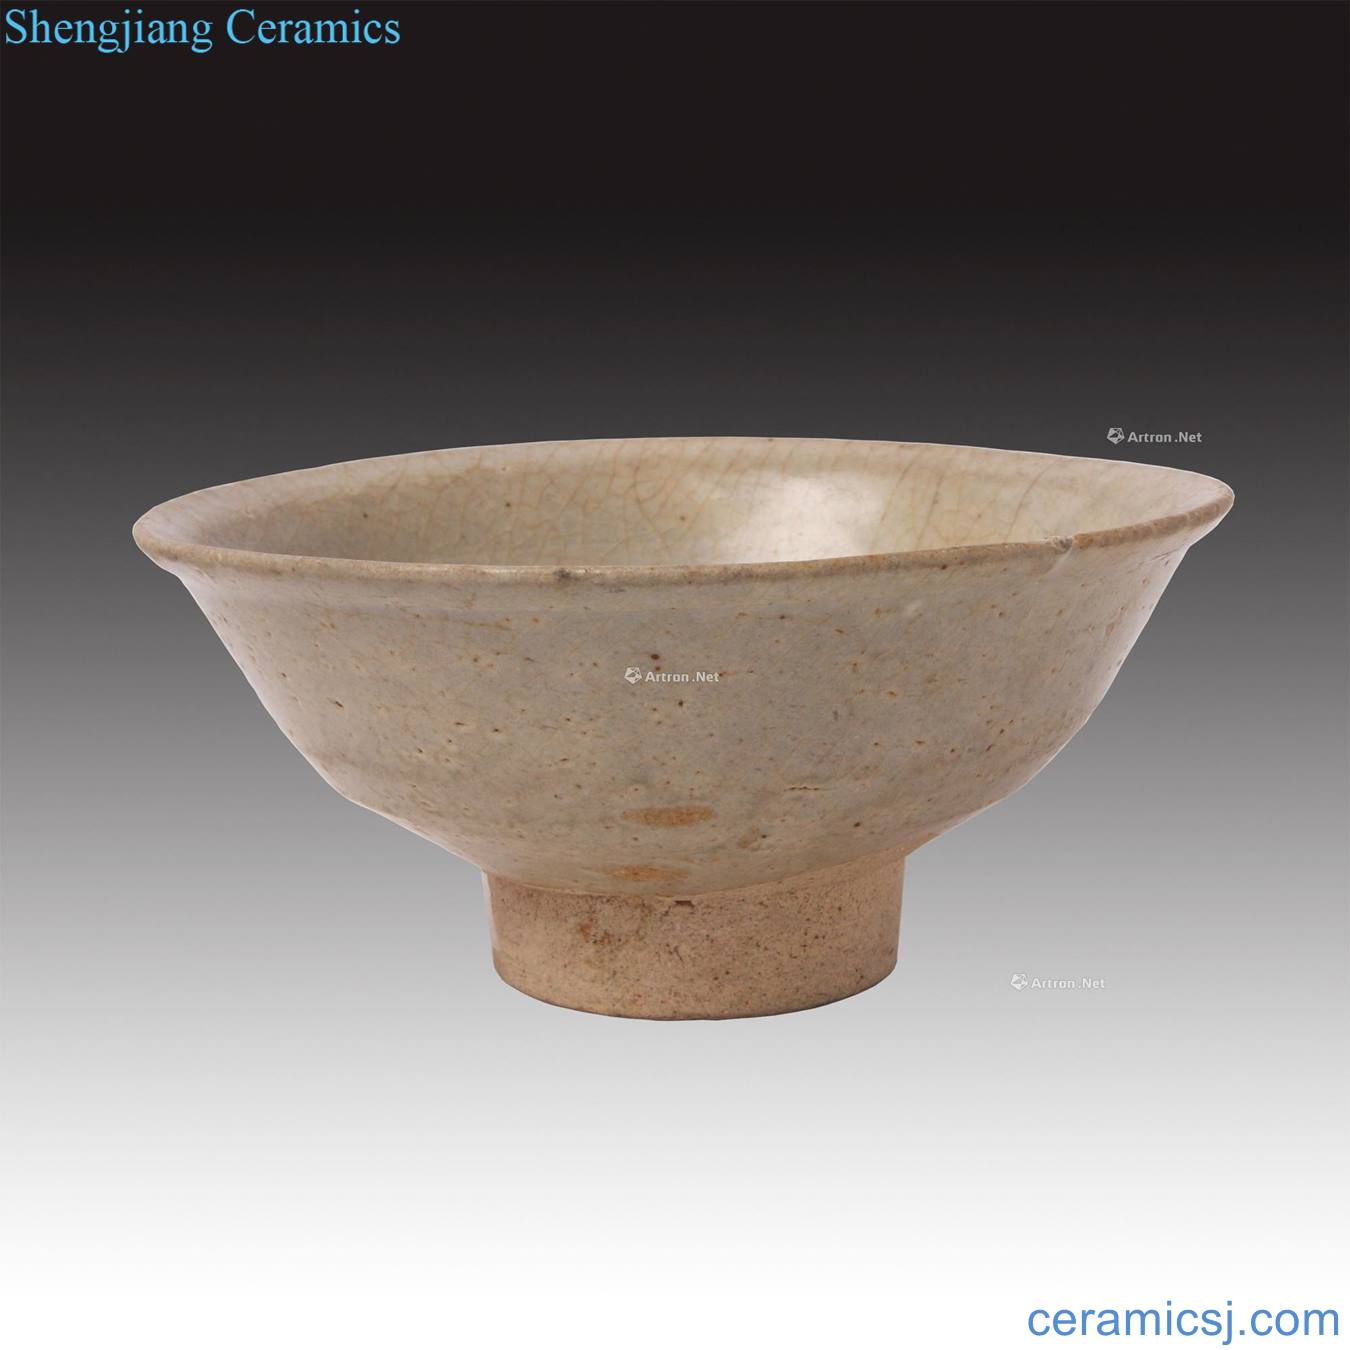 The song dynasty longquan celadon footed bowl